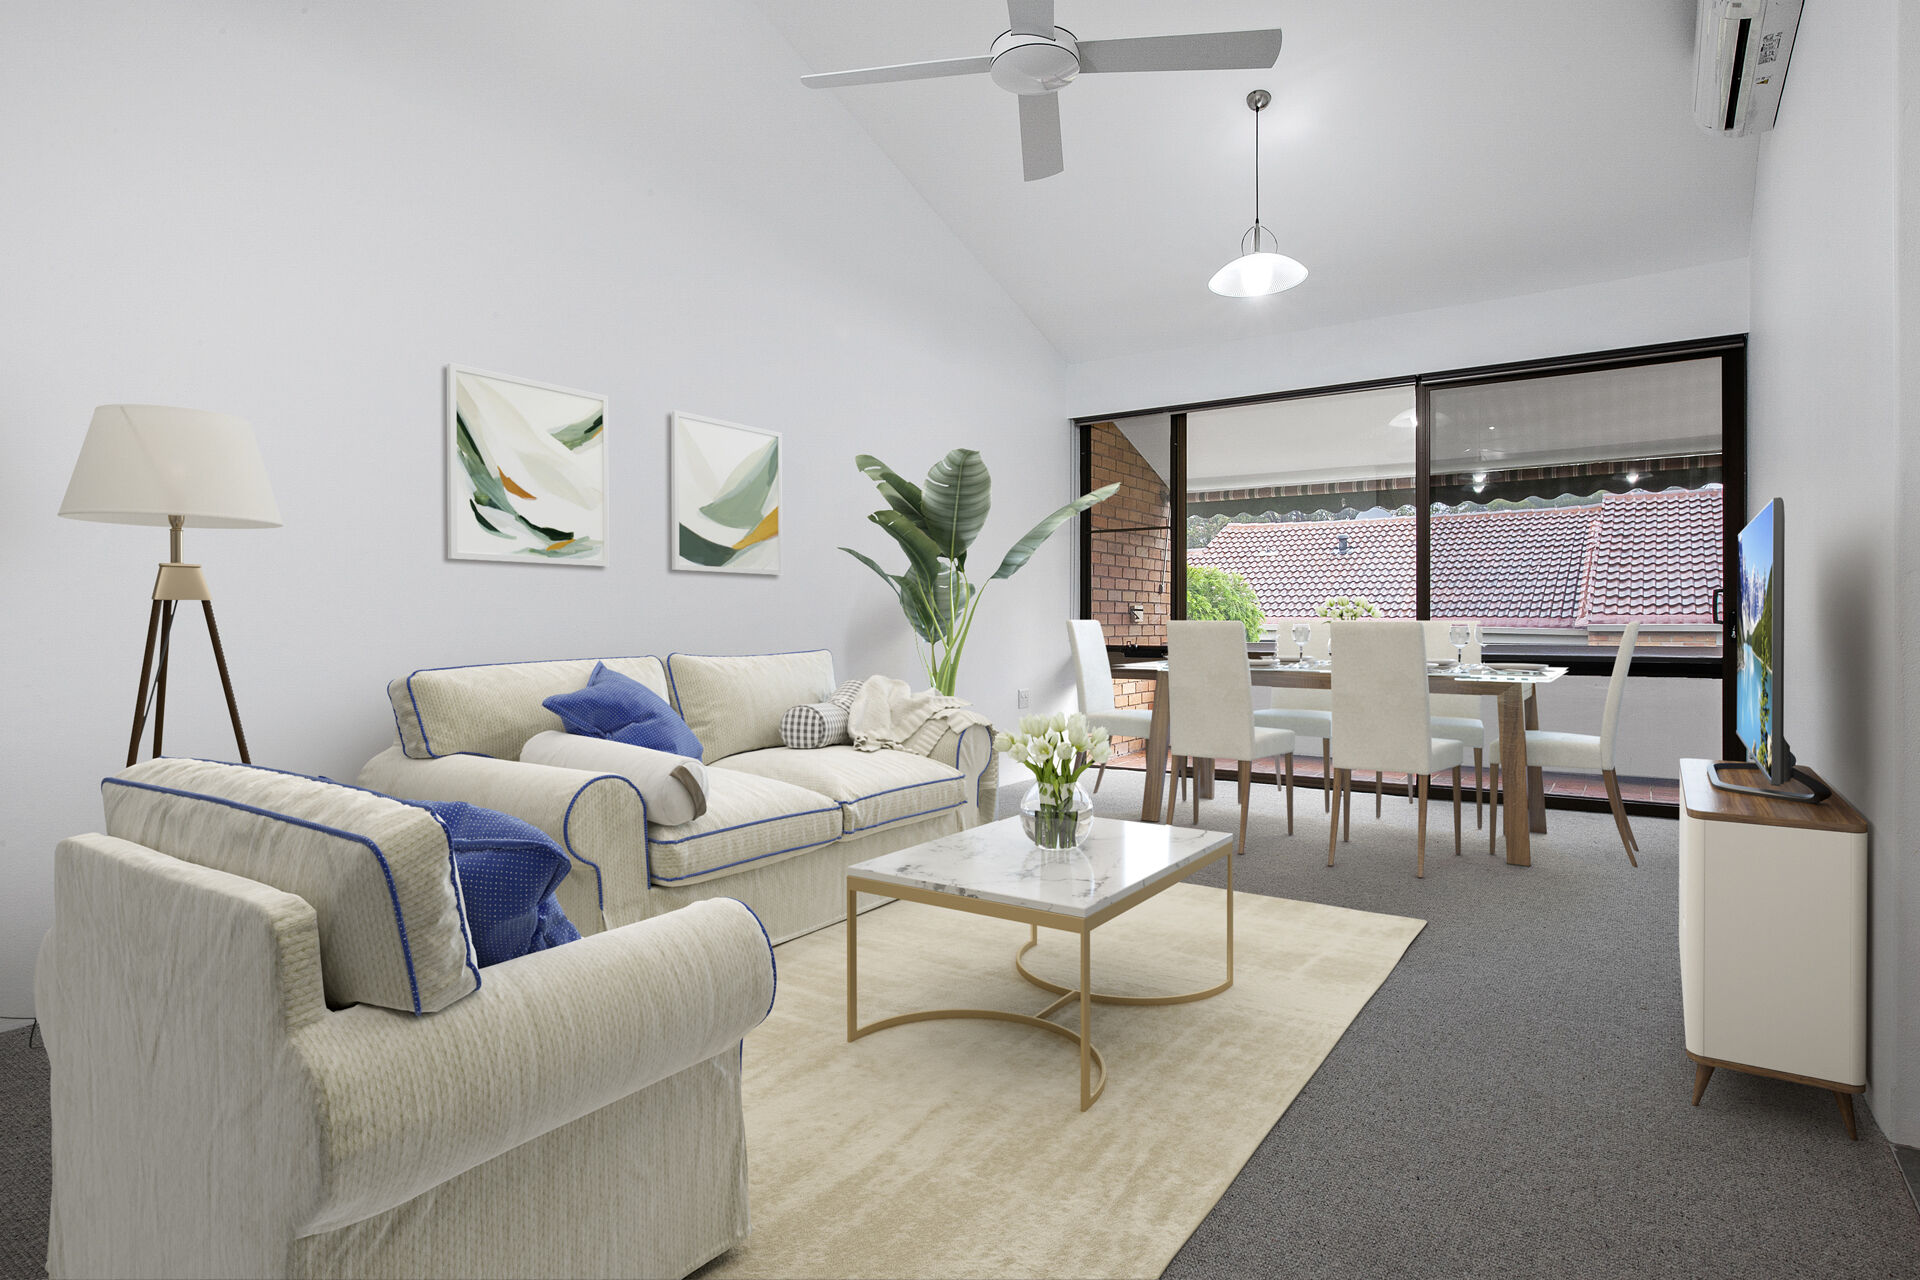 modern furnished lounge room with natural light from large window of retirement village apartment baptistcare aminya village in baulkham hills enabling over 55s to downsize